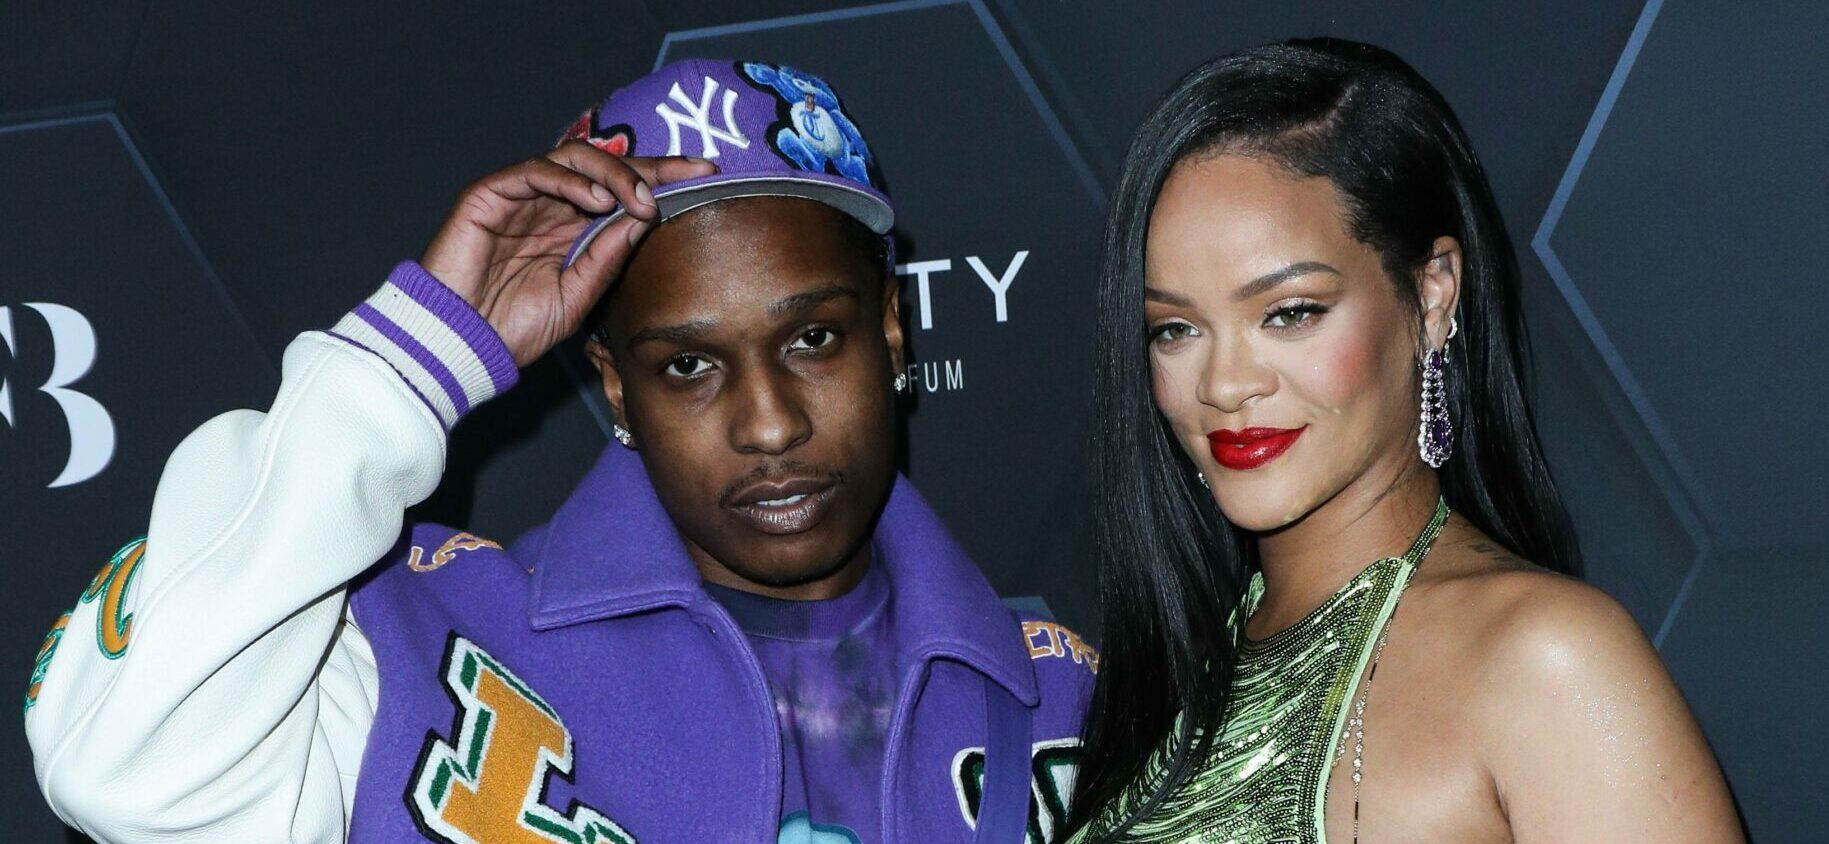 A$AP Rocky Gives Glimpse At ‘Everyday’ Family Life With Rihanna & Son RZA In Candid Snaps